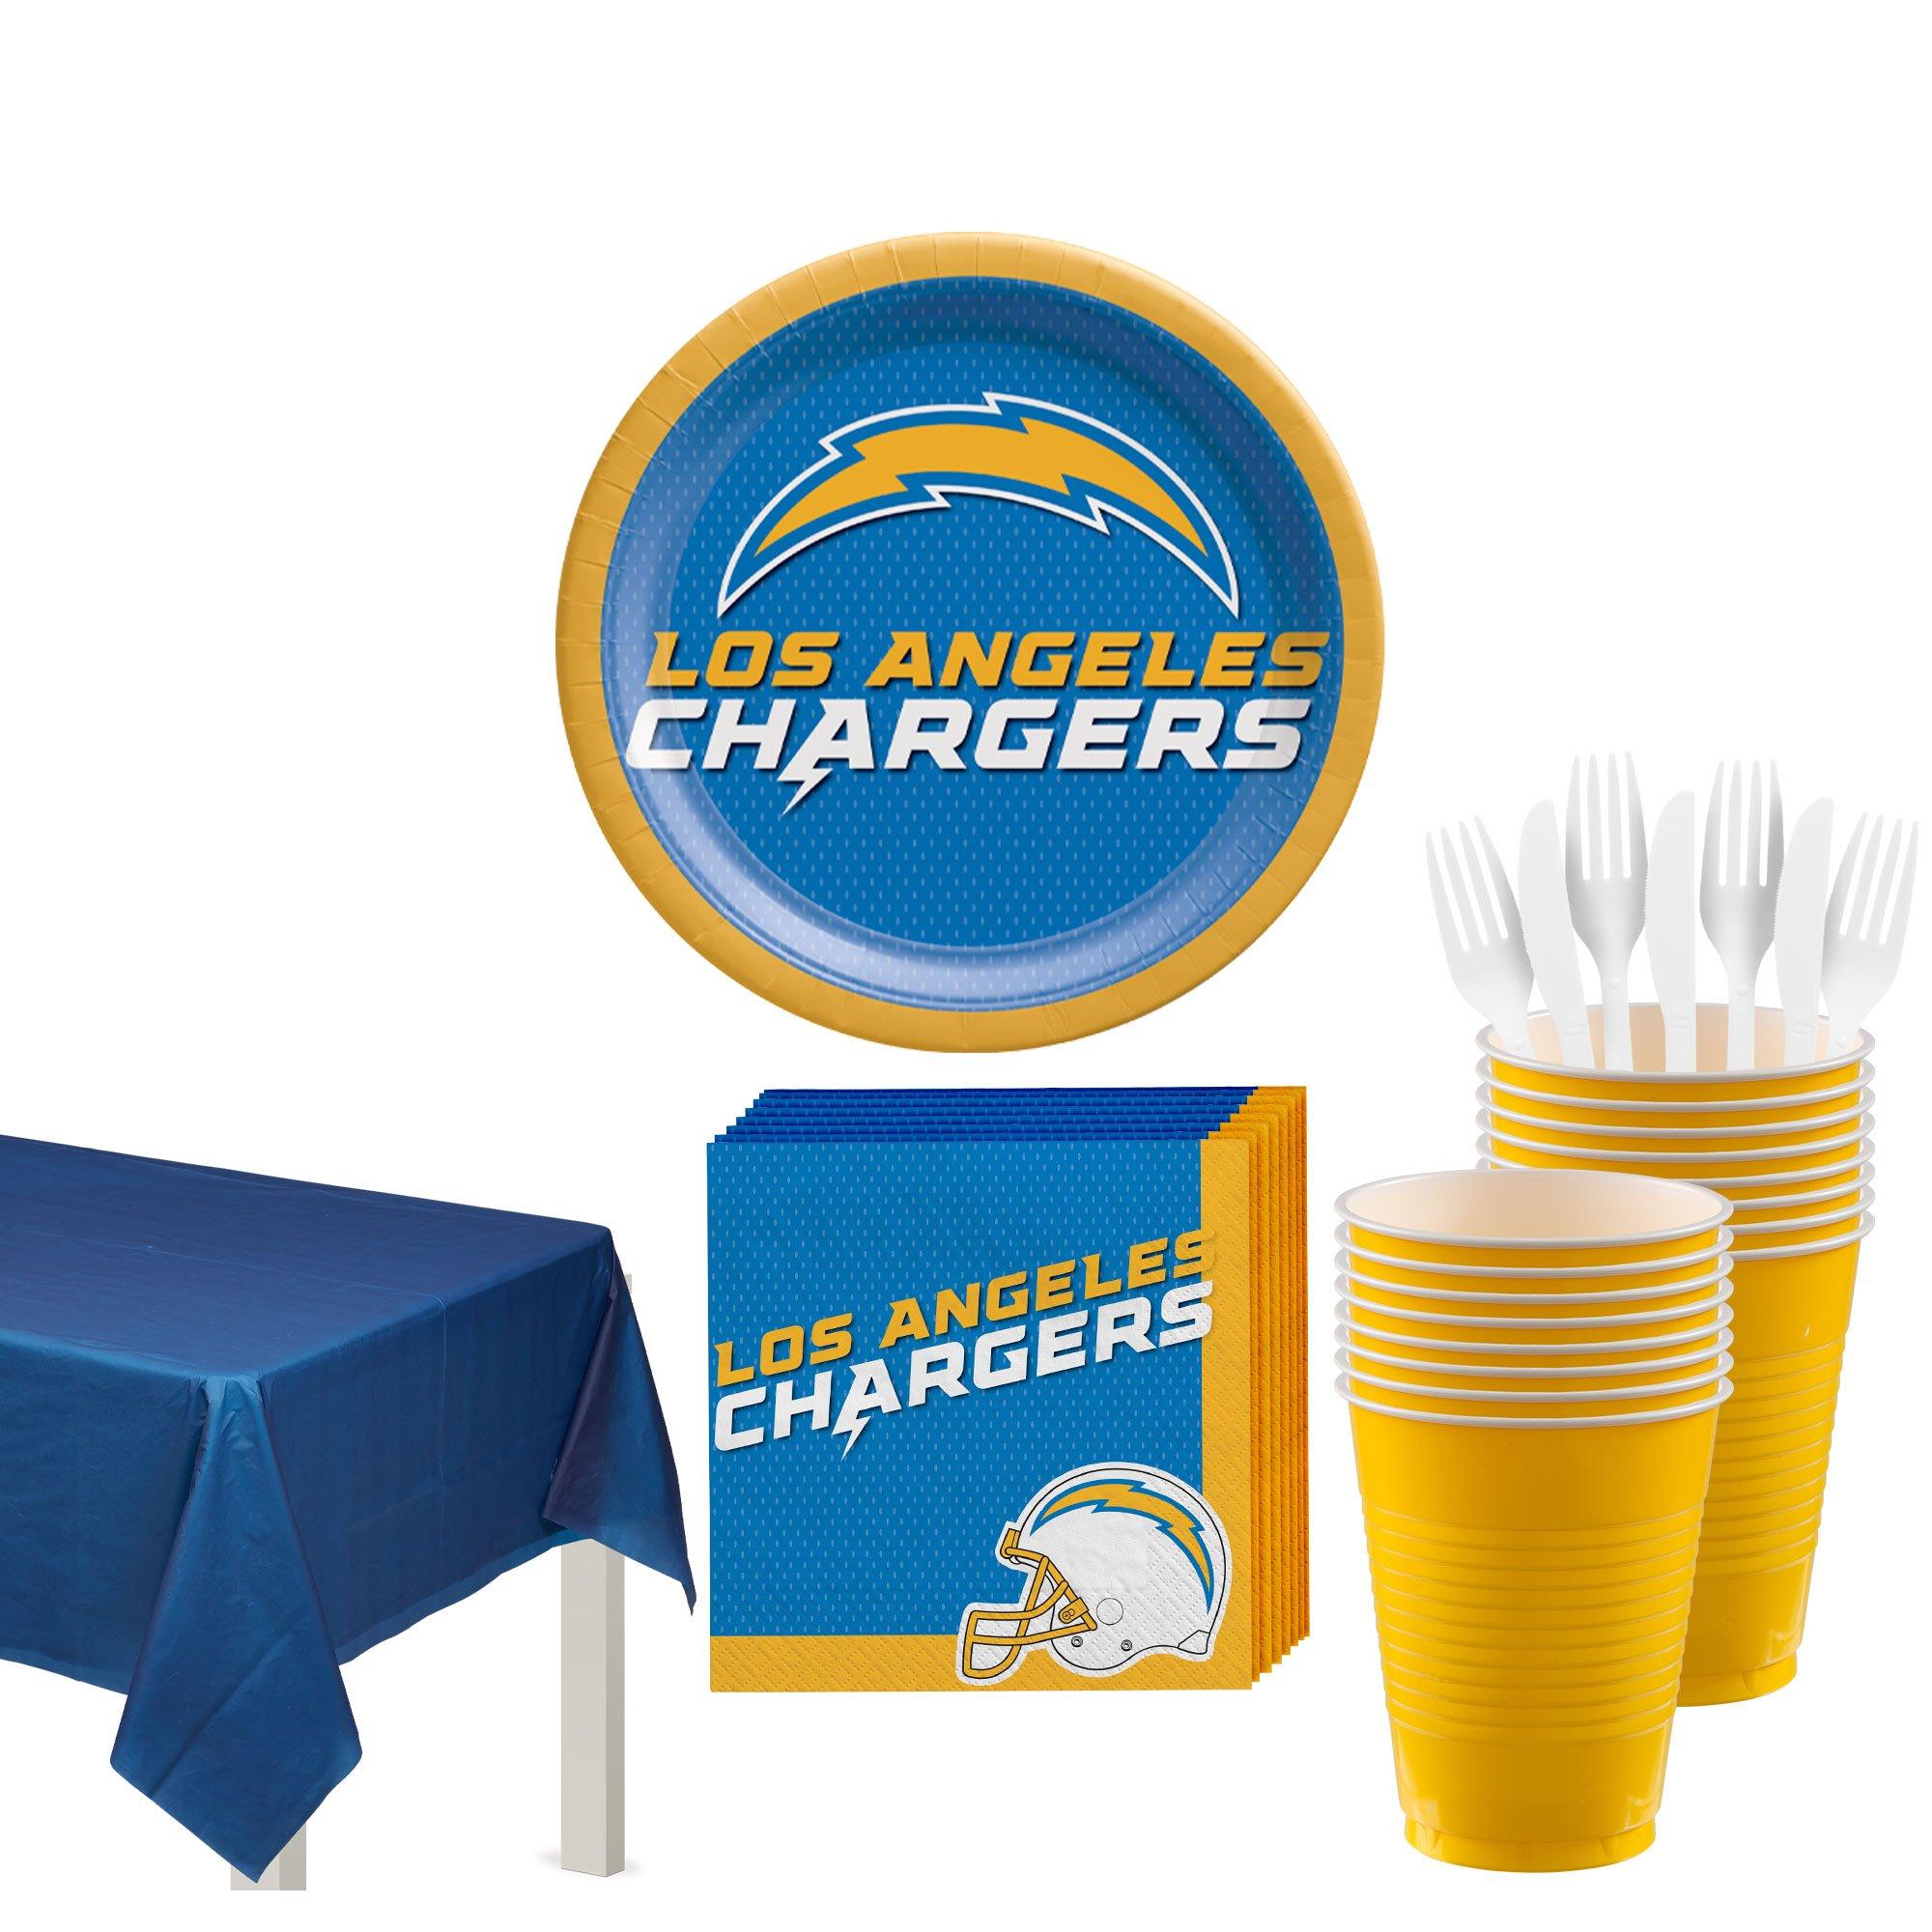 Los Angeles Chargers Balloon Bouquet 5pc